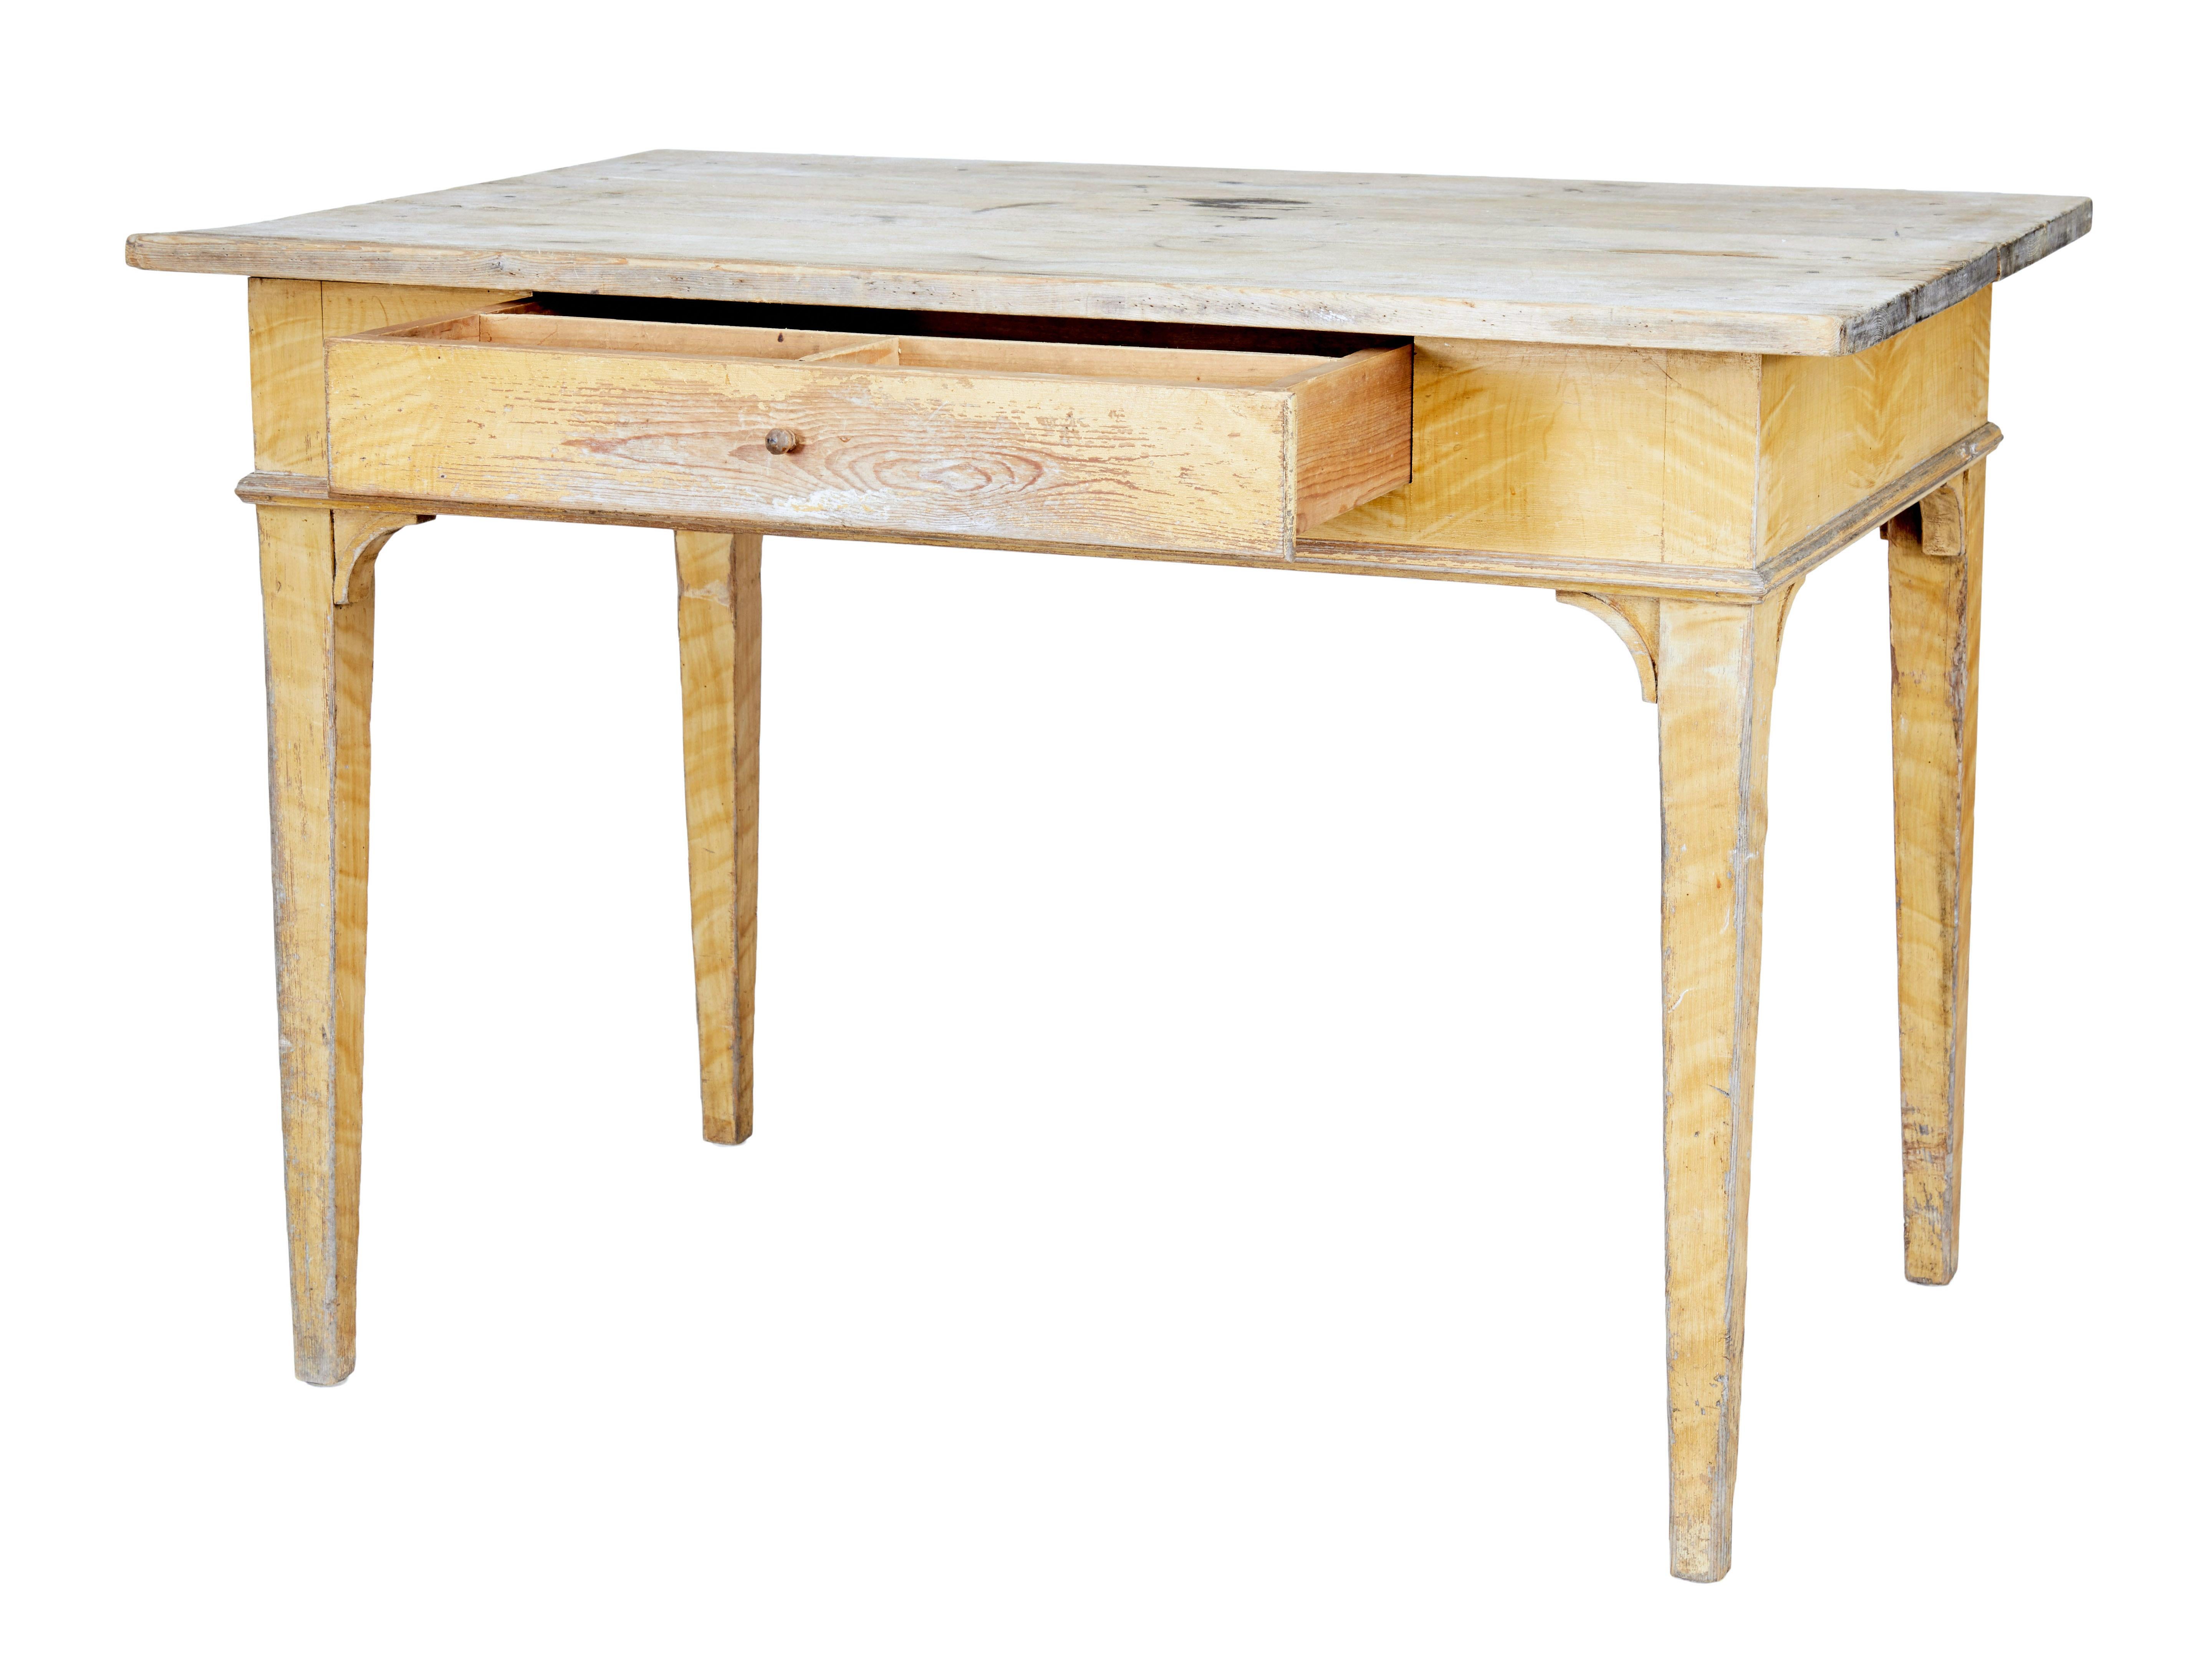 Swedish 19th Century Painted Pine Kitchen Table In Good Condition For Sale In Debenham, Suffolk